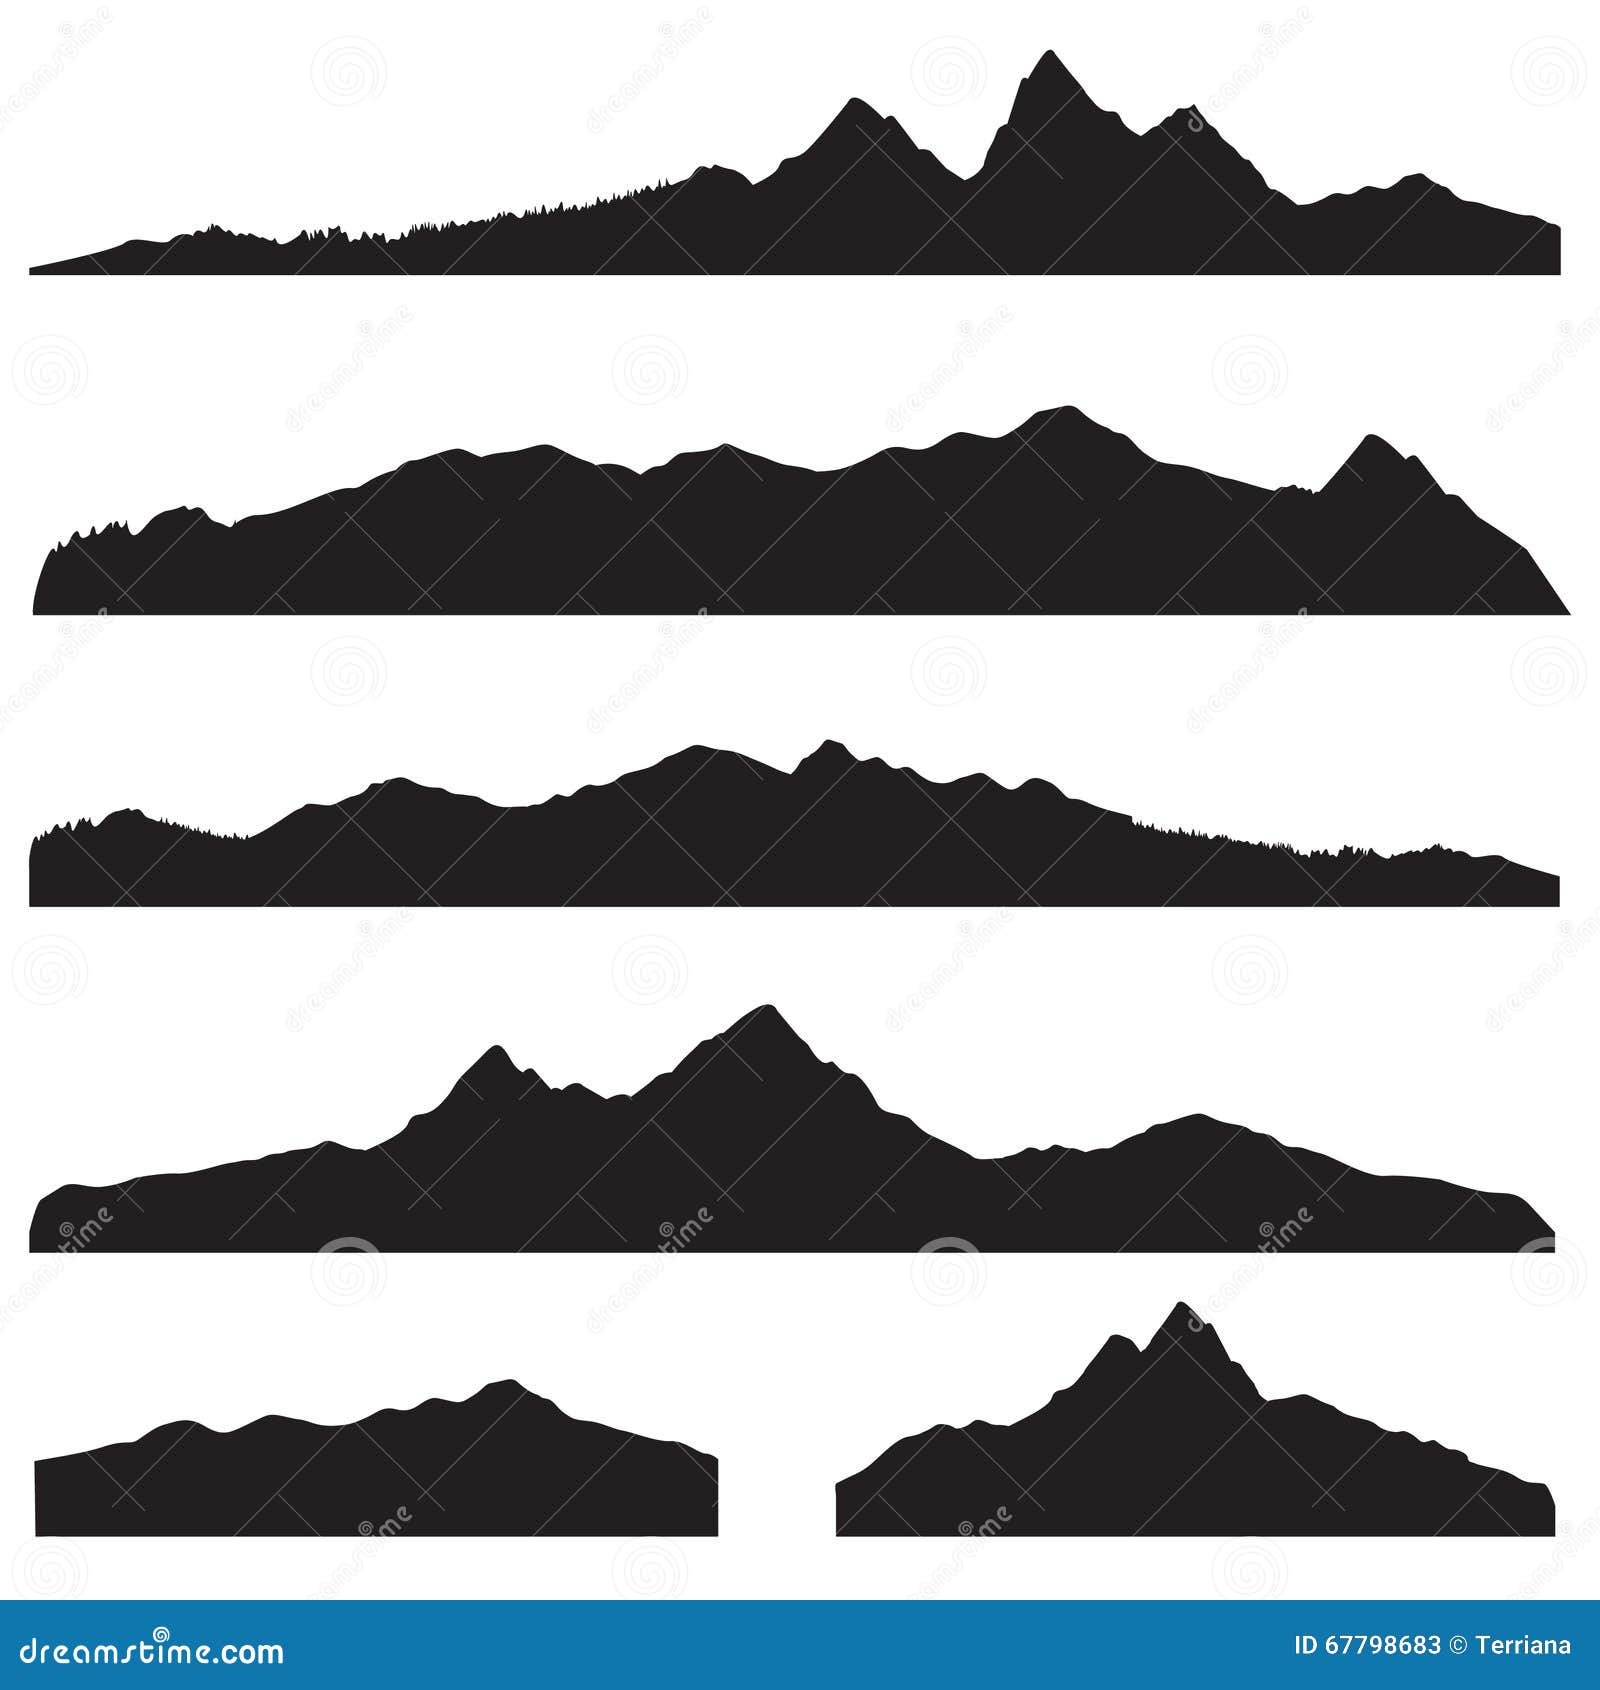 Black silhouette of mountains. The drawing is made in black paint